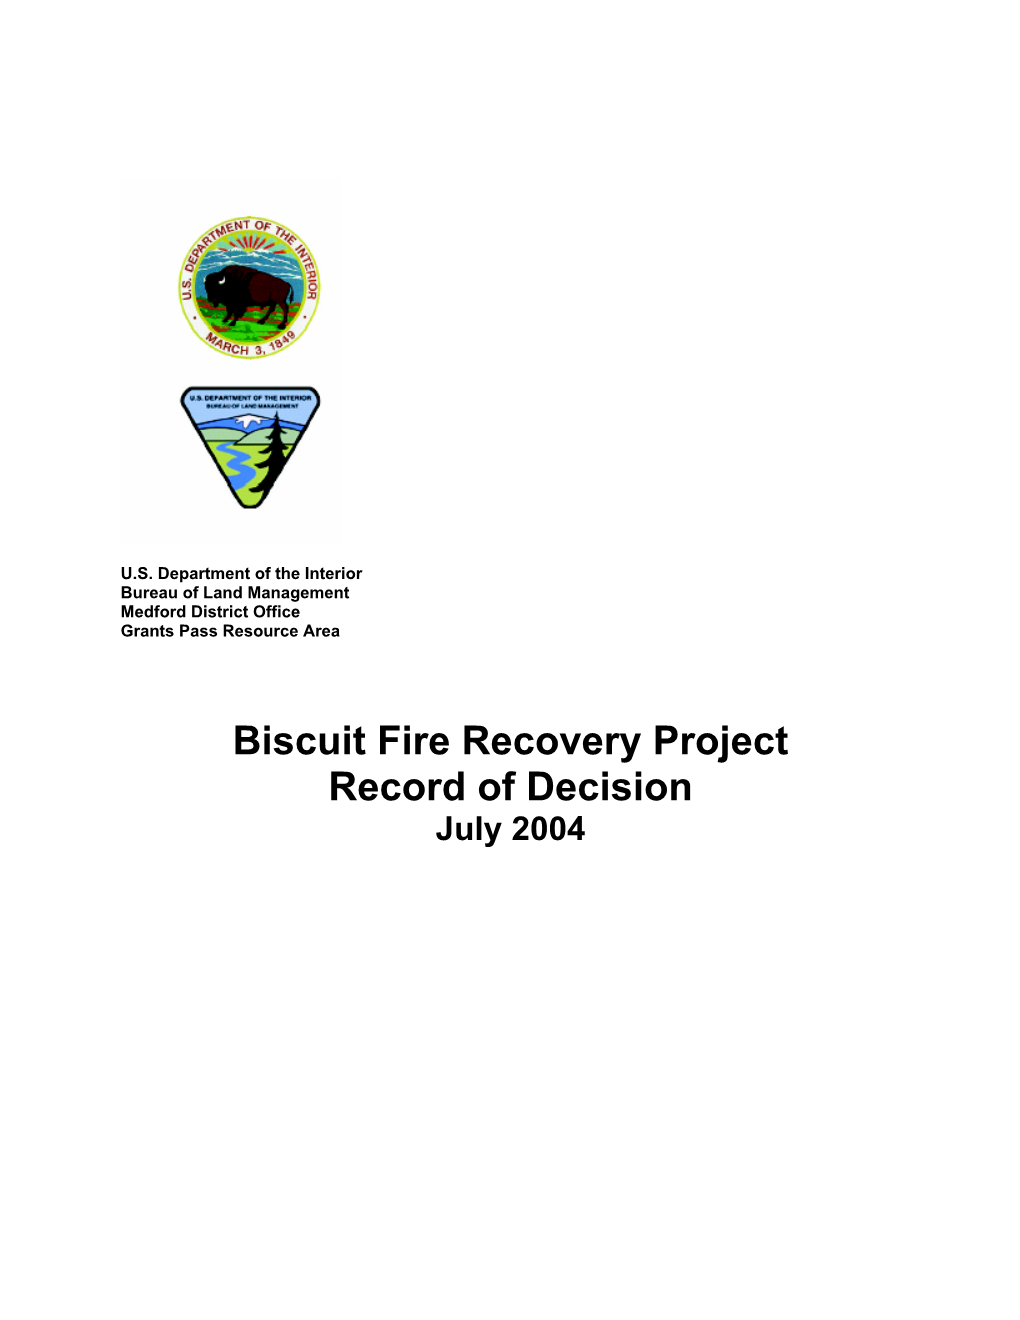 Biscuit Fire Recovery Project Record of Decision July 2004